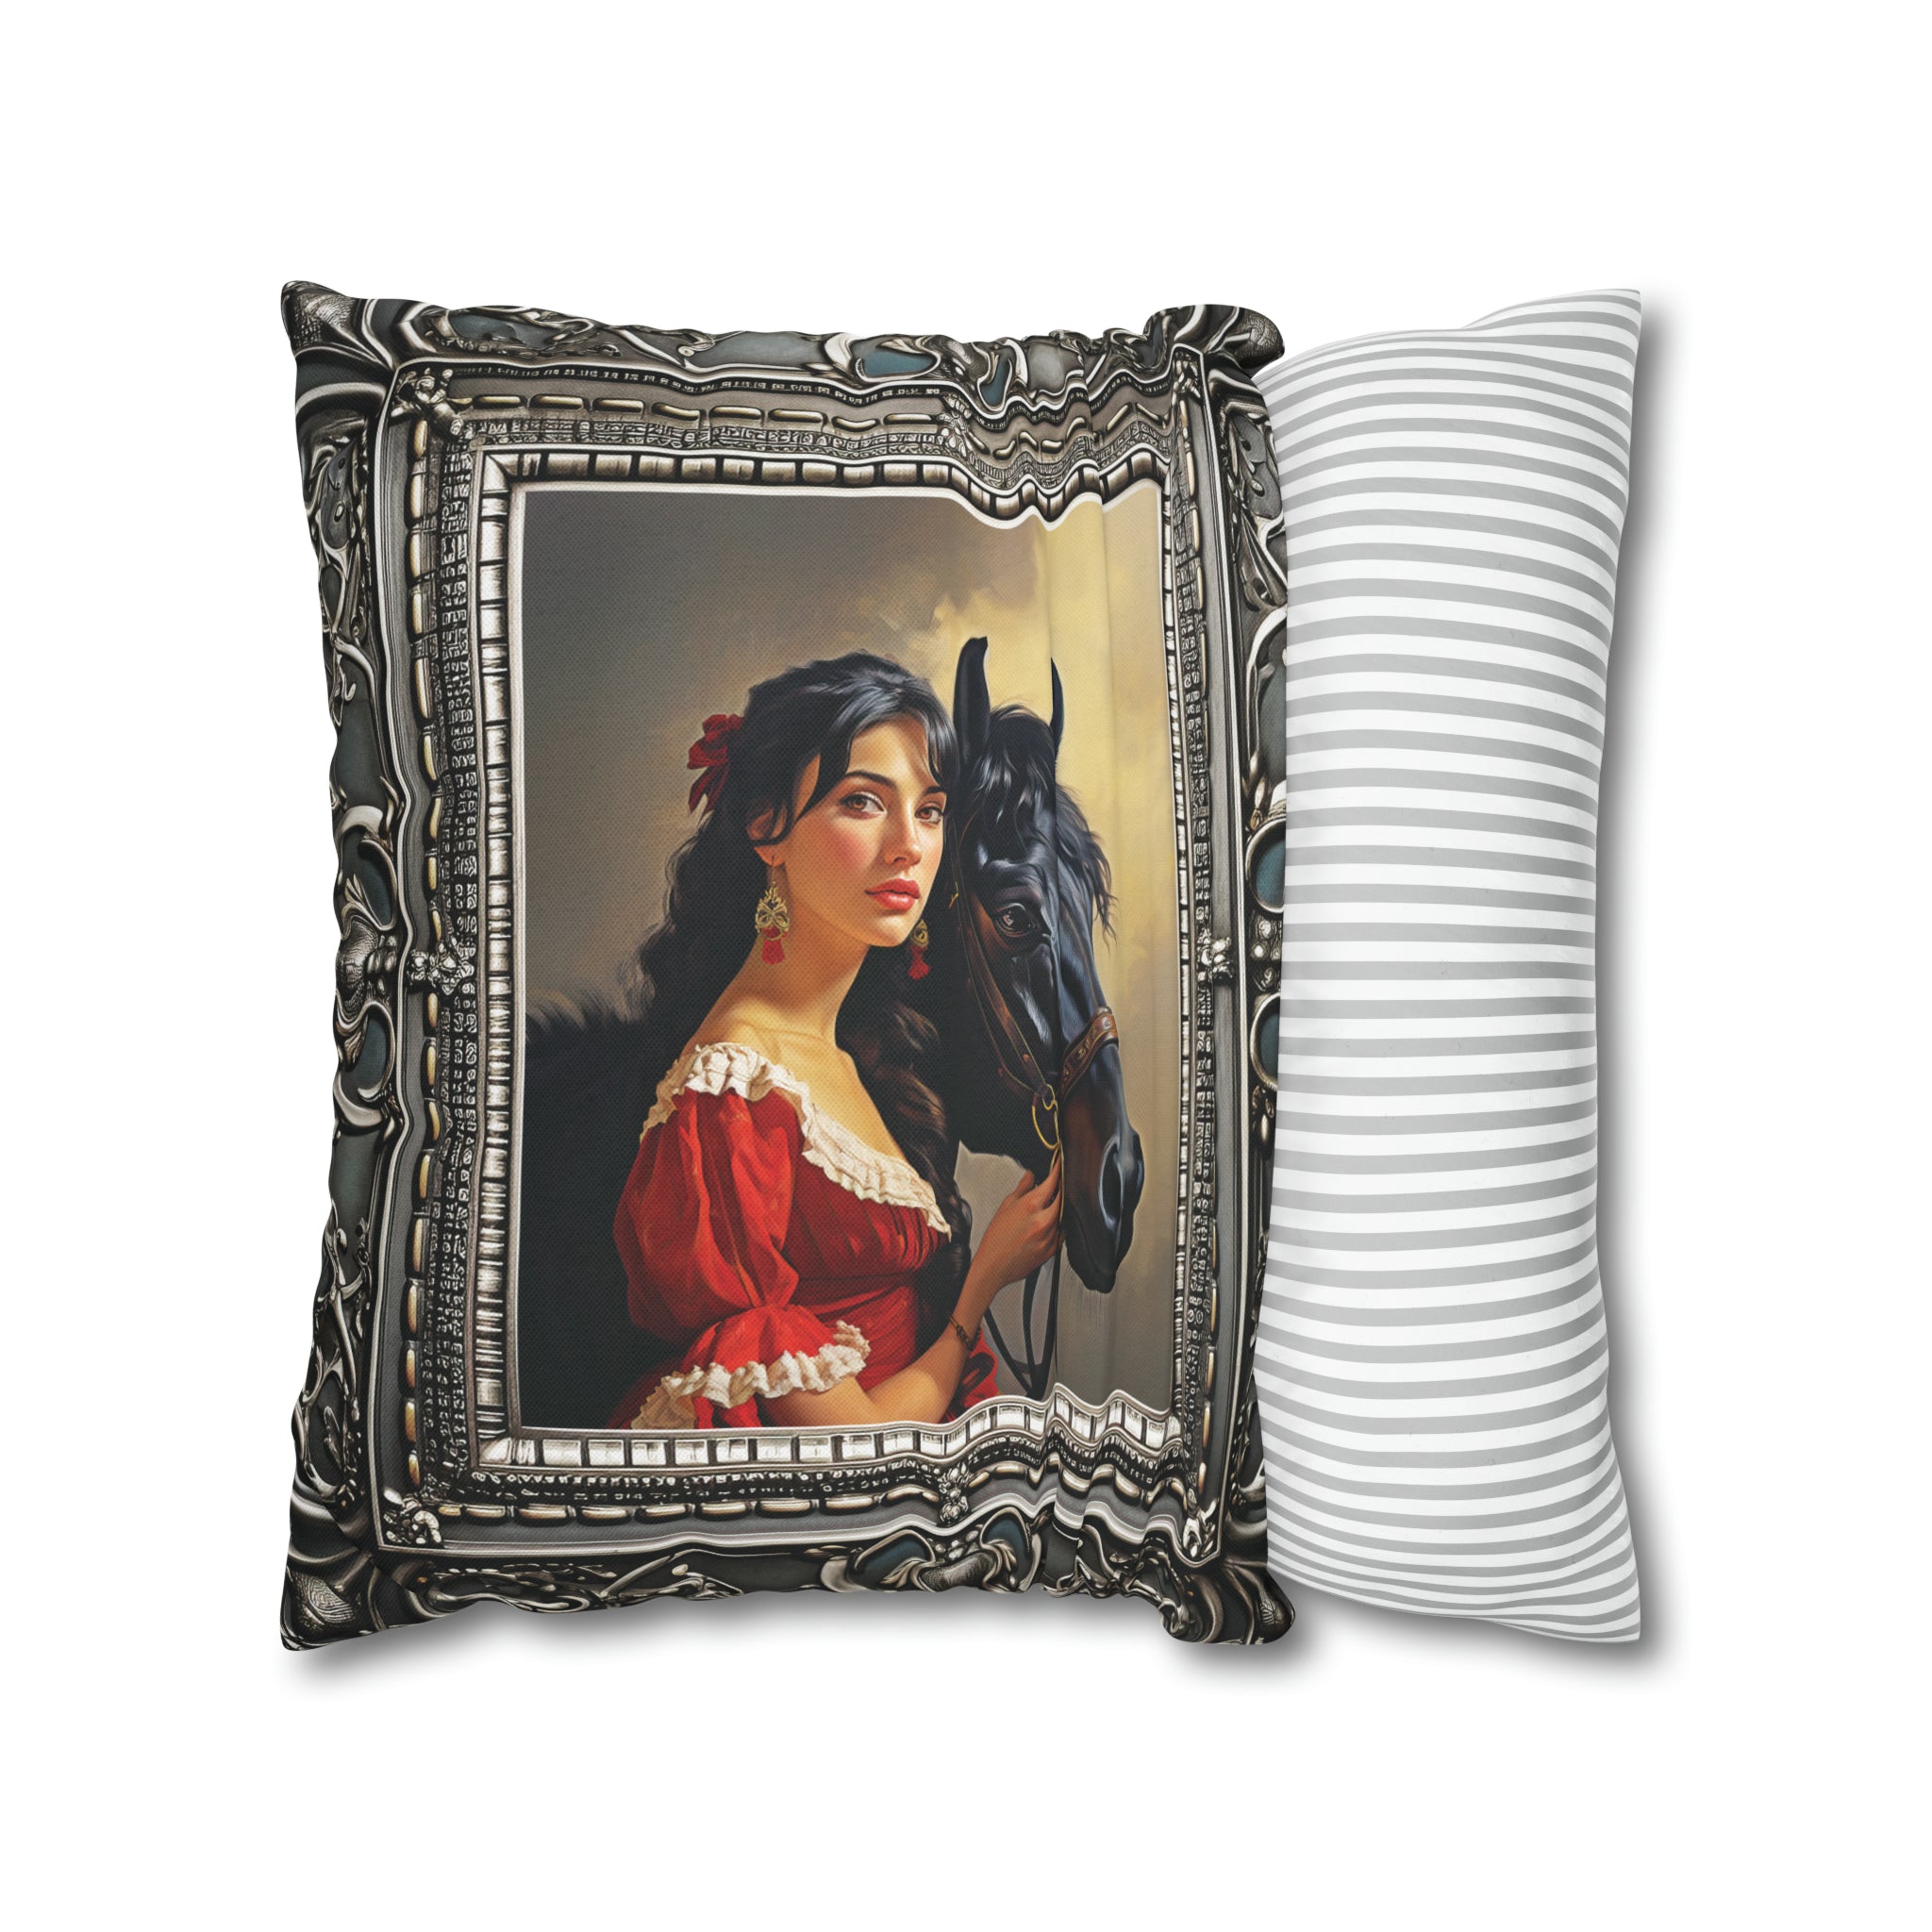 Square Pillow Case 18" x 18", CASE ONLY, no pillow form, original Art, A beautiful Painting of a Woman and Her Horse in an Antique Frame